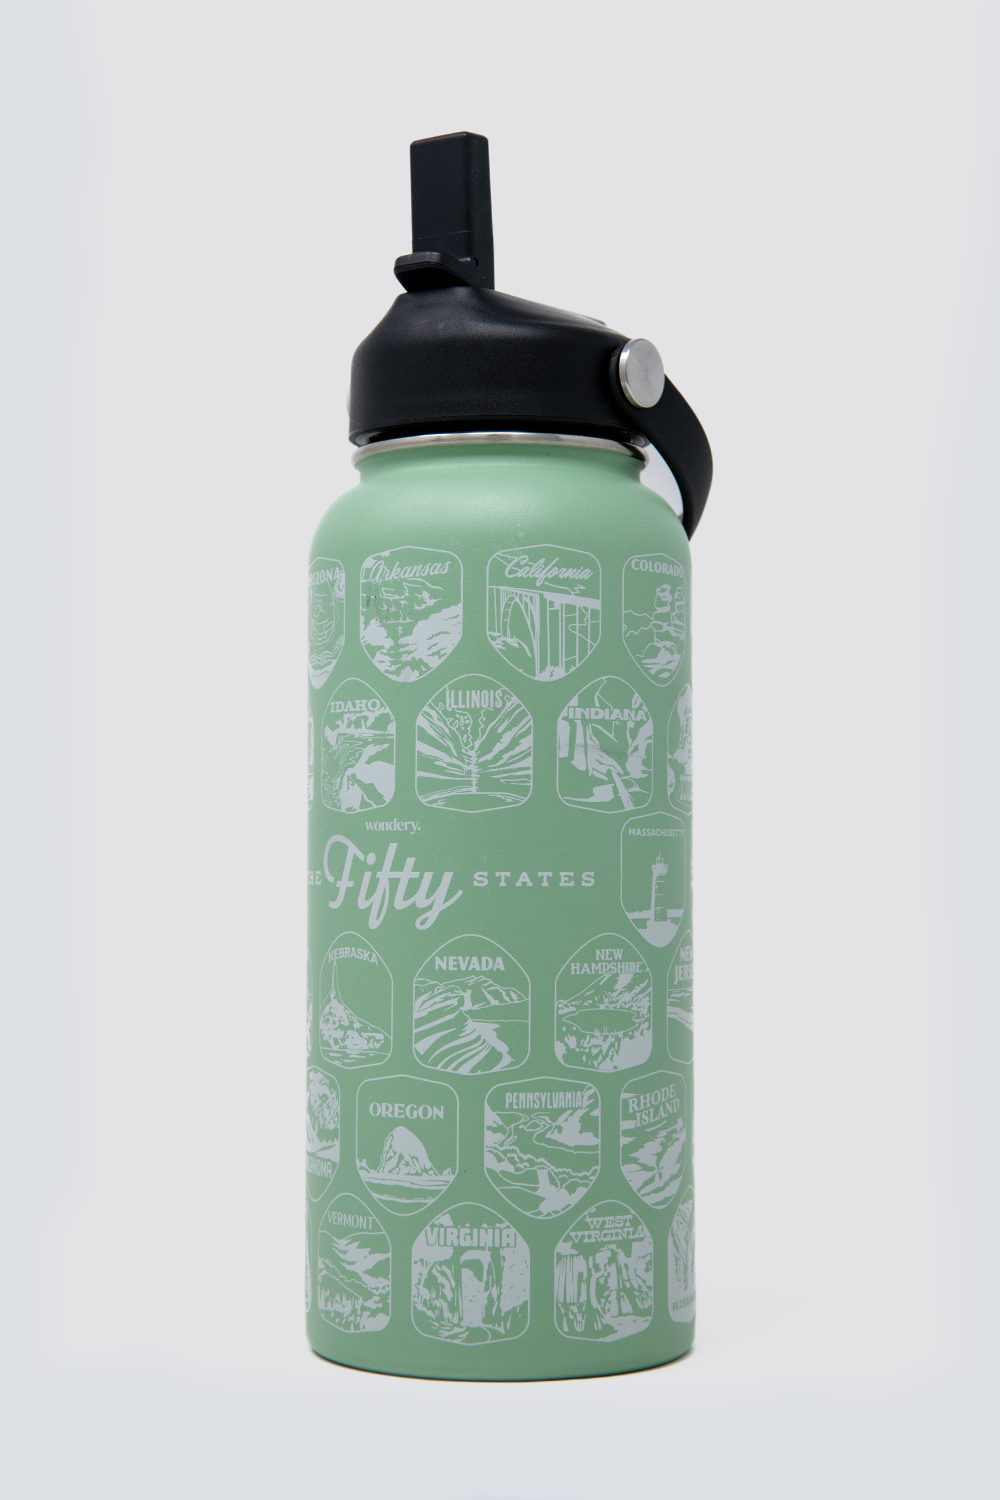 National Park Icons Water Bottle - Shop Americas National Parks